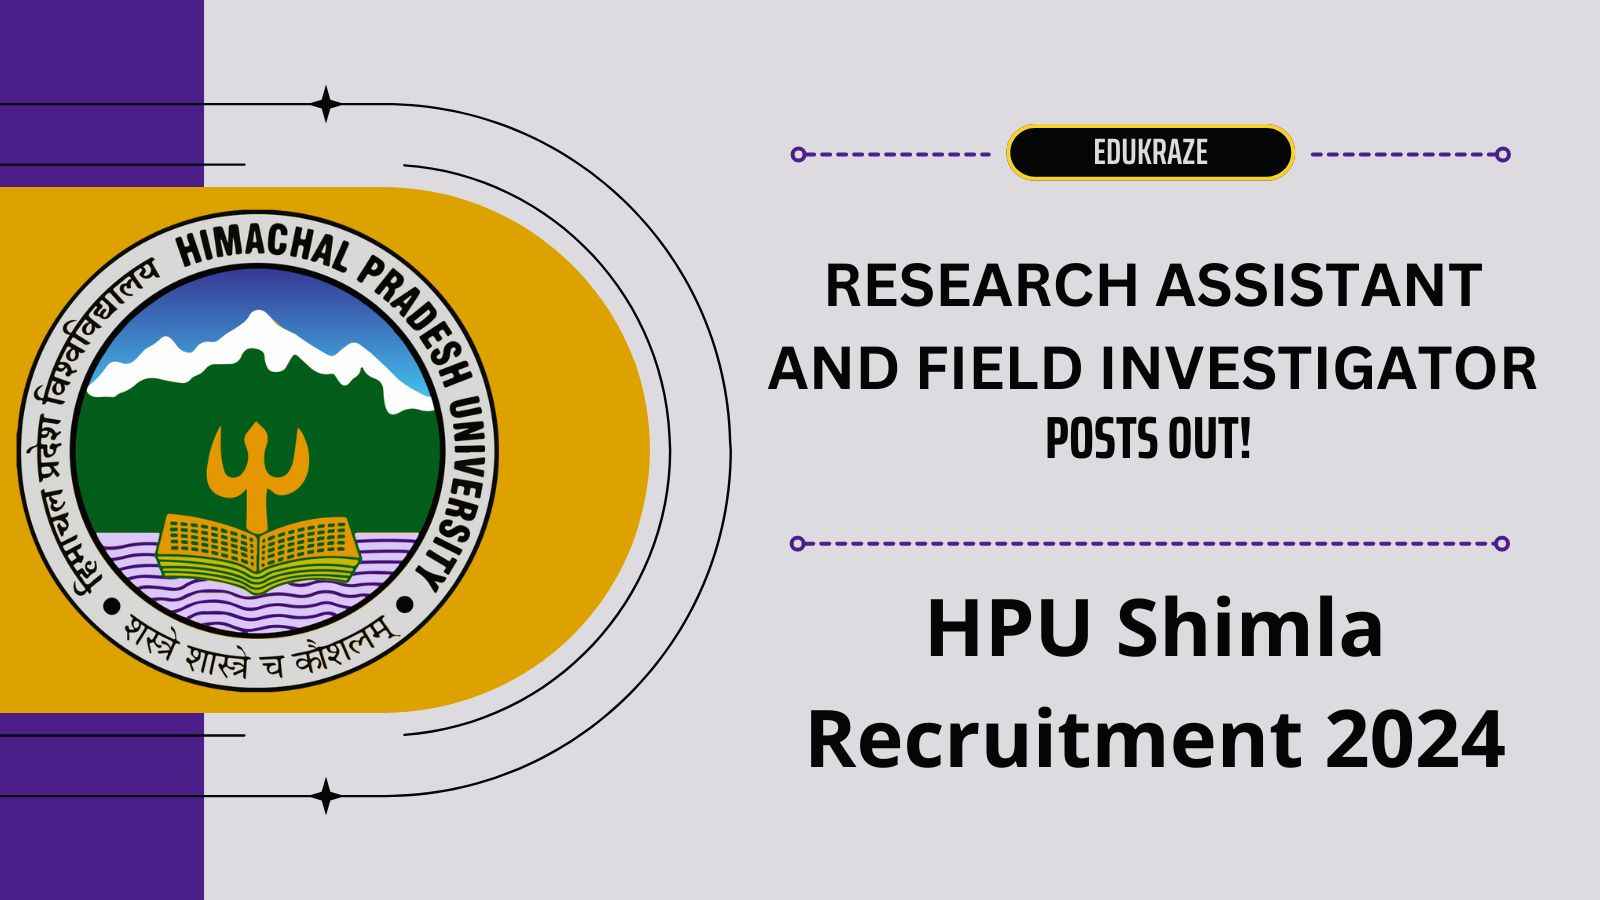 HPU Shimla Recruitment 2024 Out for Research Assistant and Field Investigator, Check Notification!